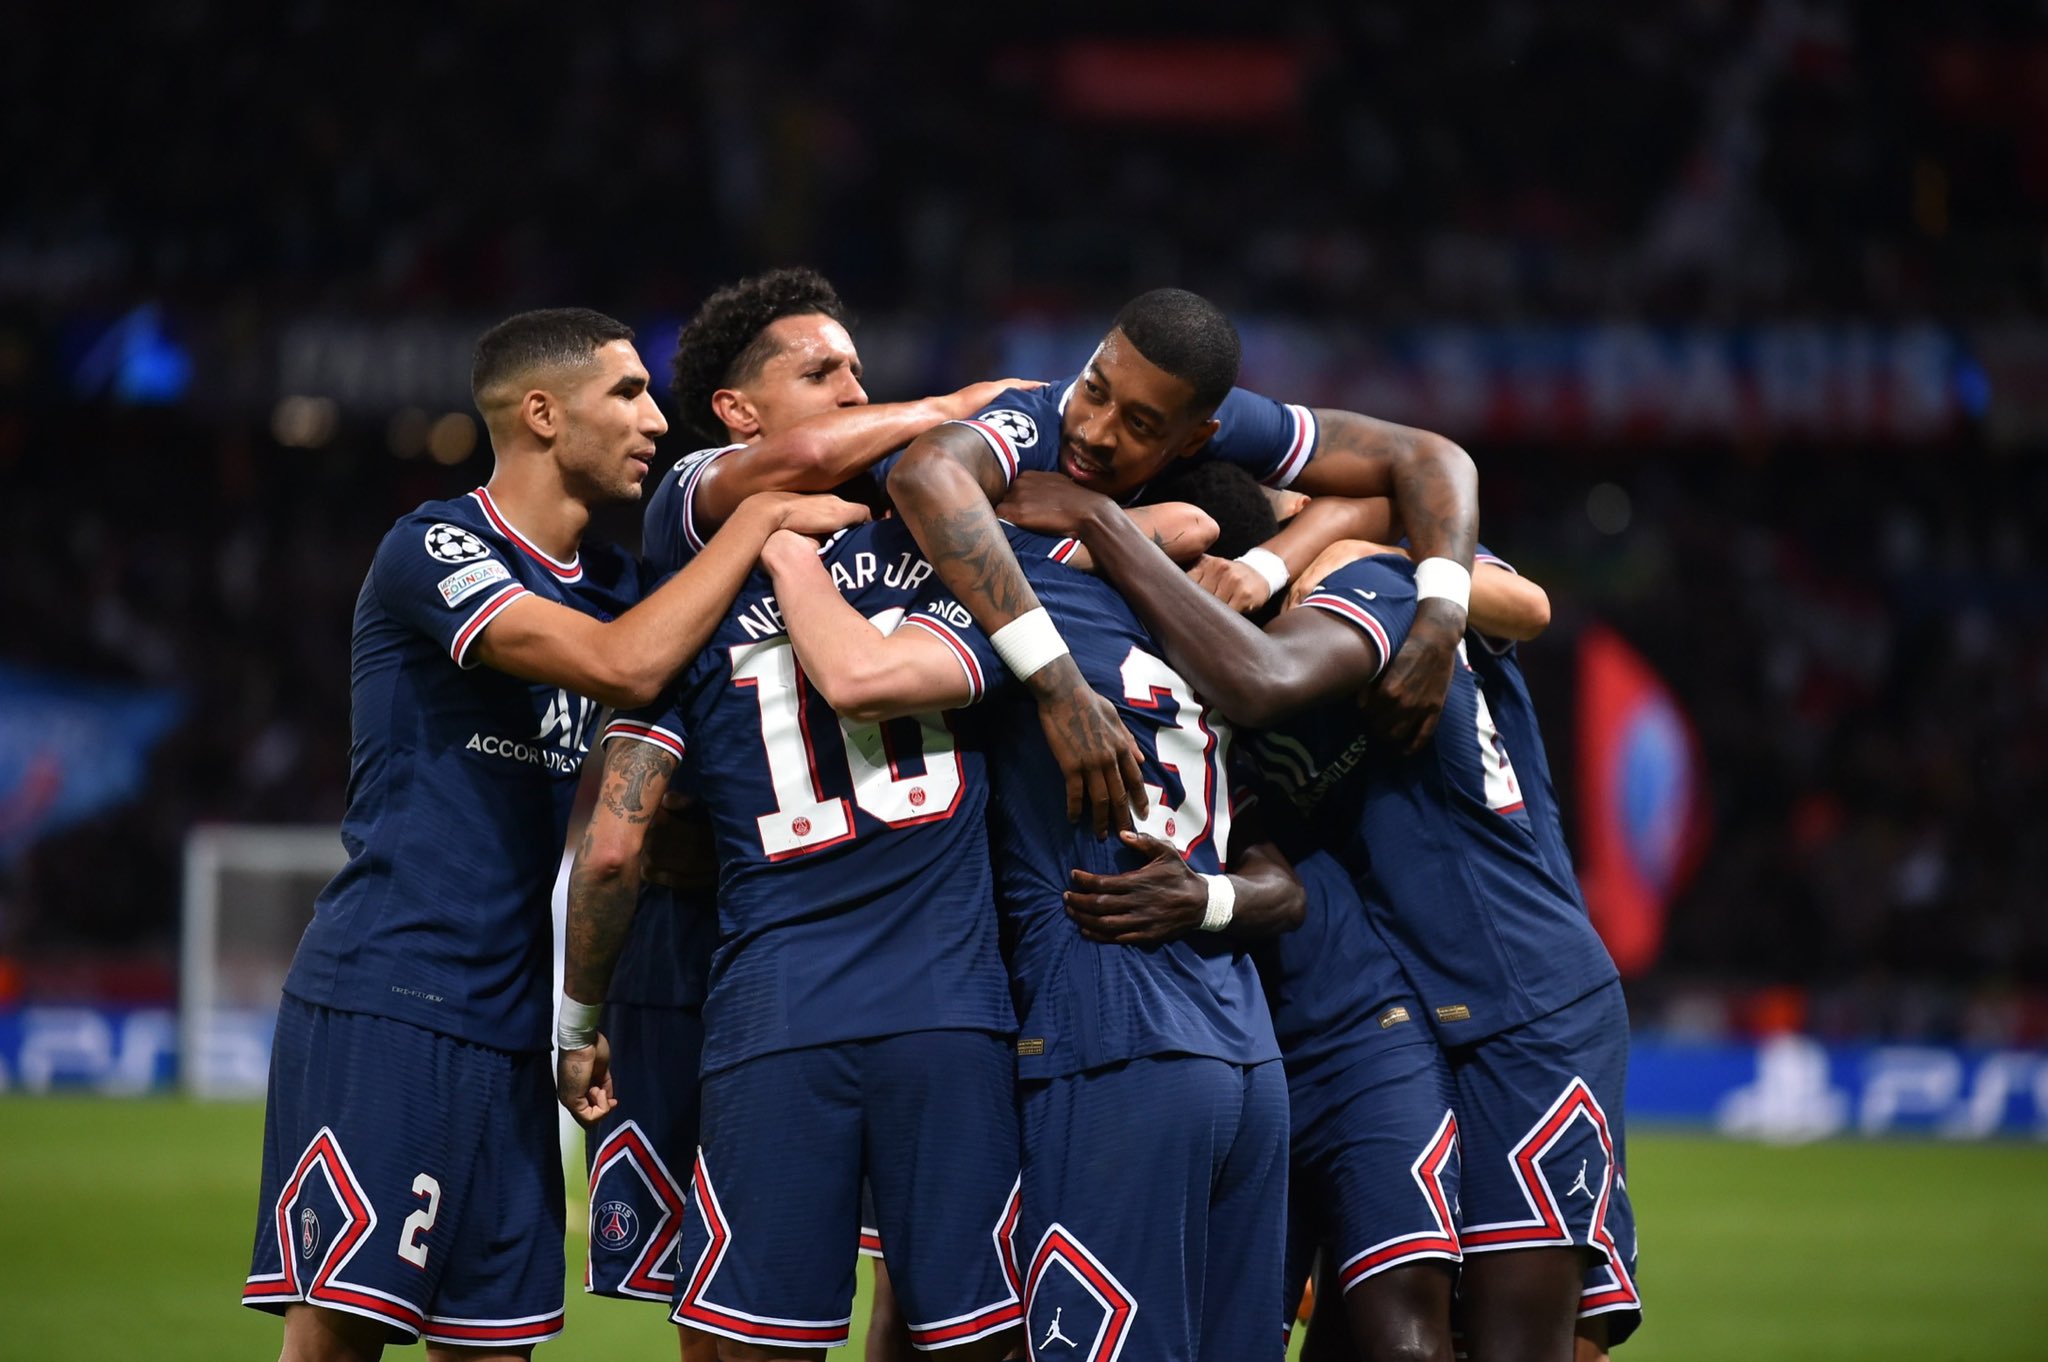 We know we can do better and are disappointed by this defeat, proclaims Presnel Kimpembe